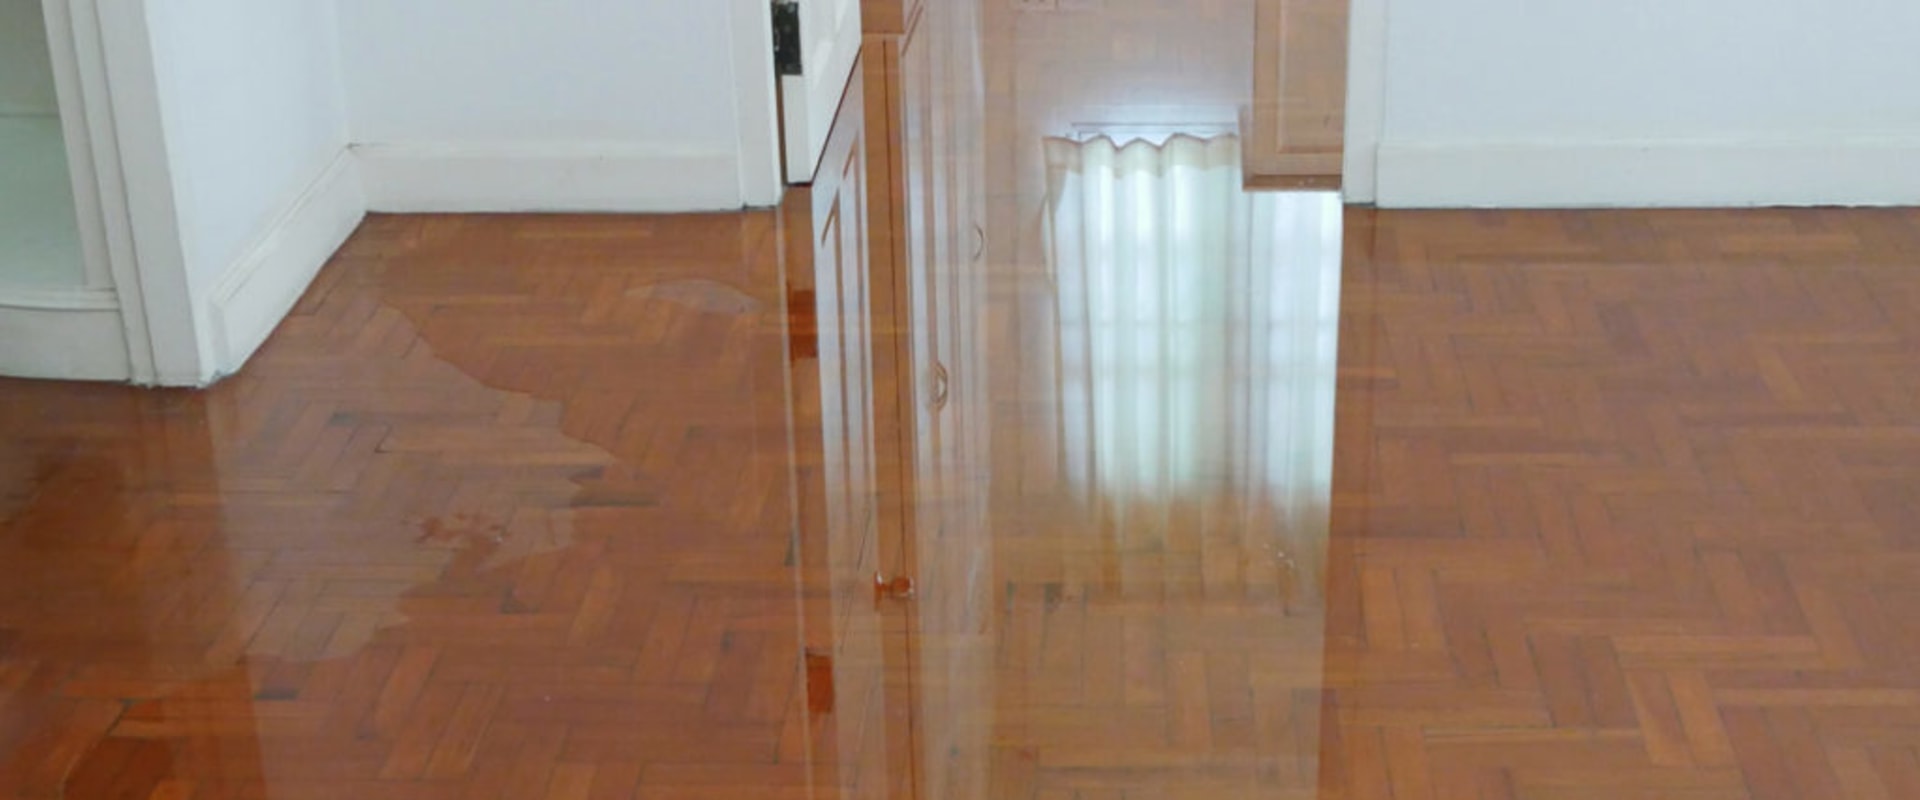 What are the most common causes of water damage?